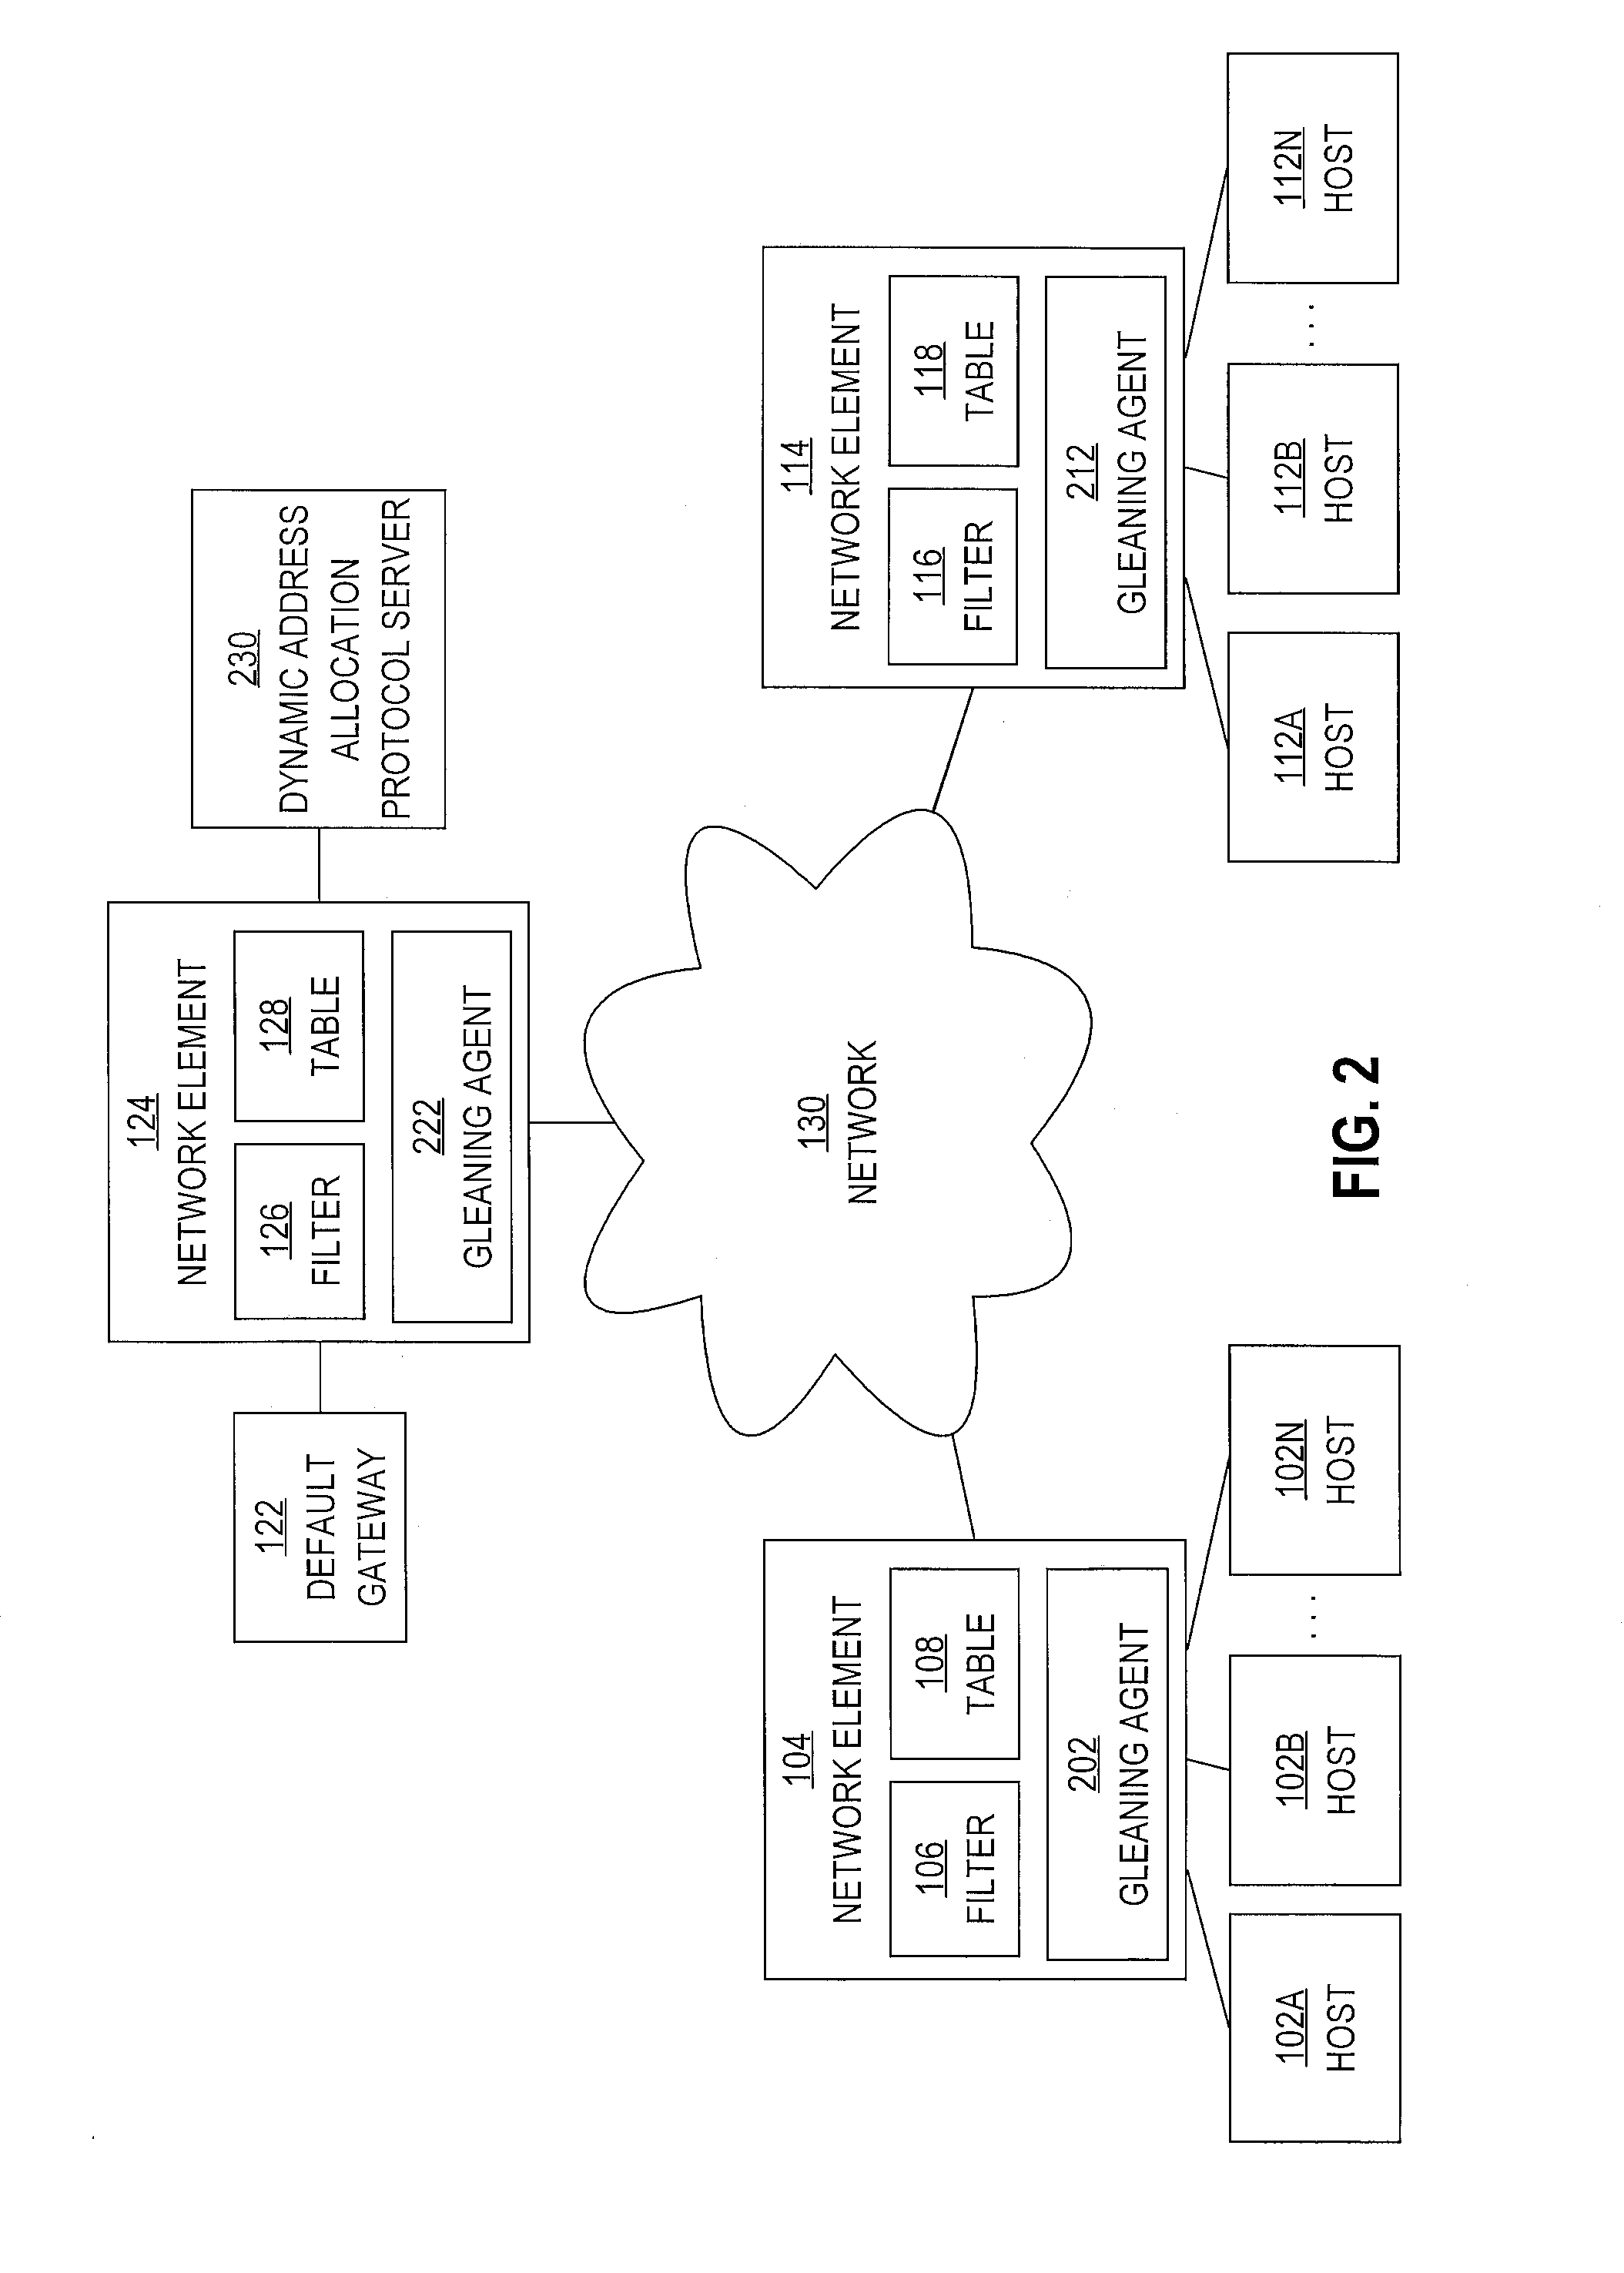 Method and Apparatus for Automatic Filter Generation and Maintenance